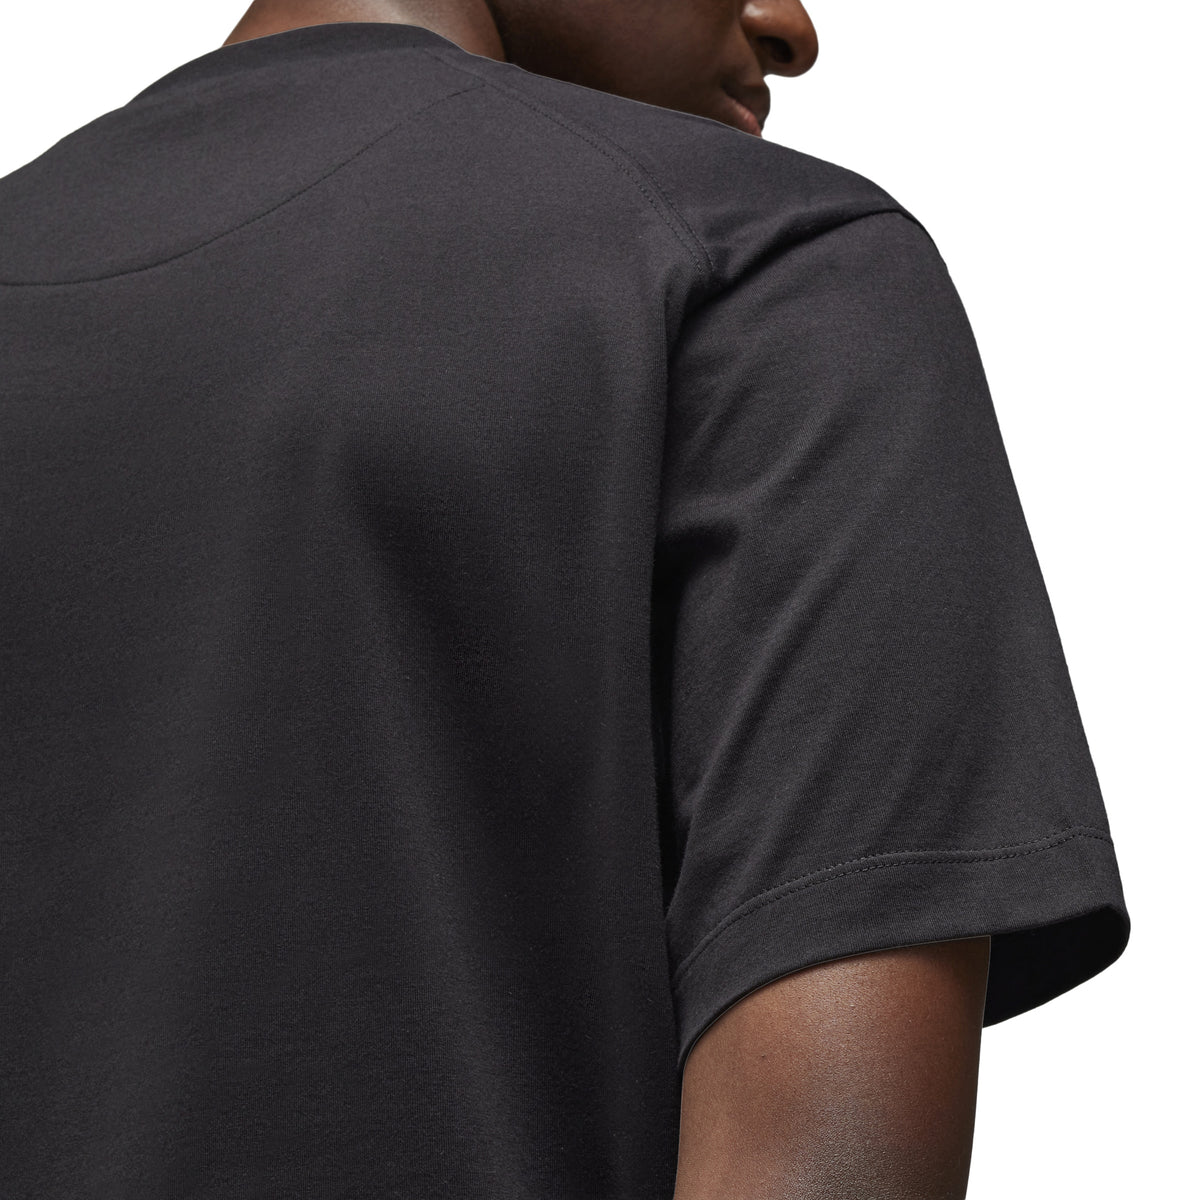 Y-3 Relaxed S/S Tee - Black